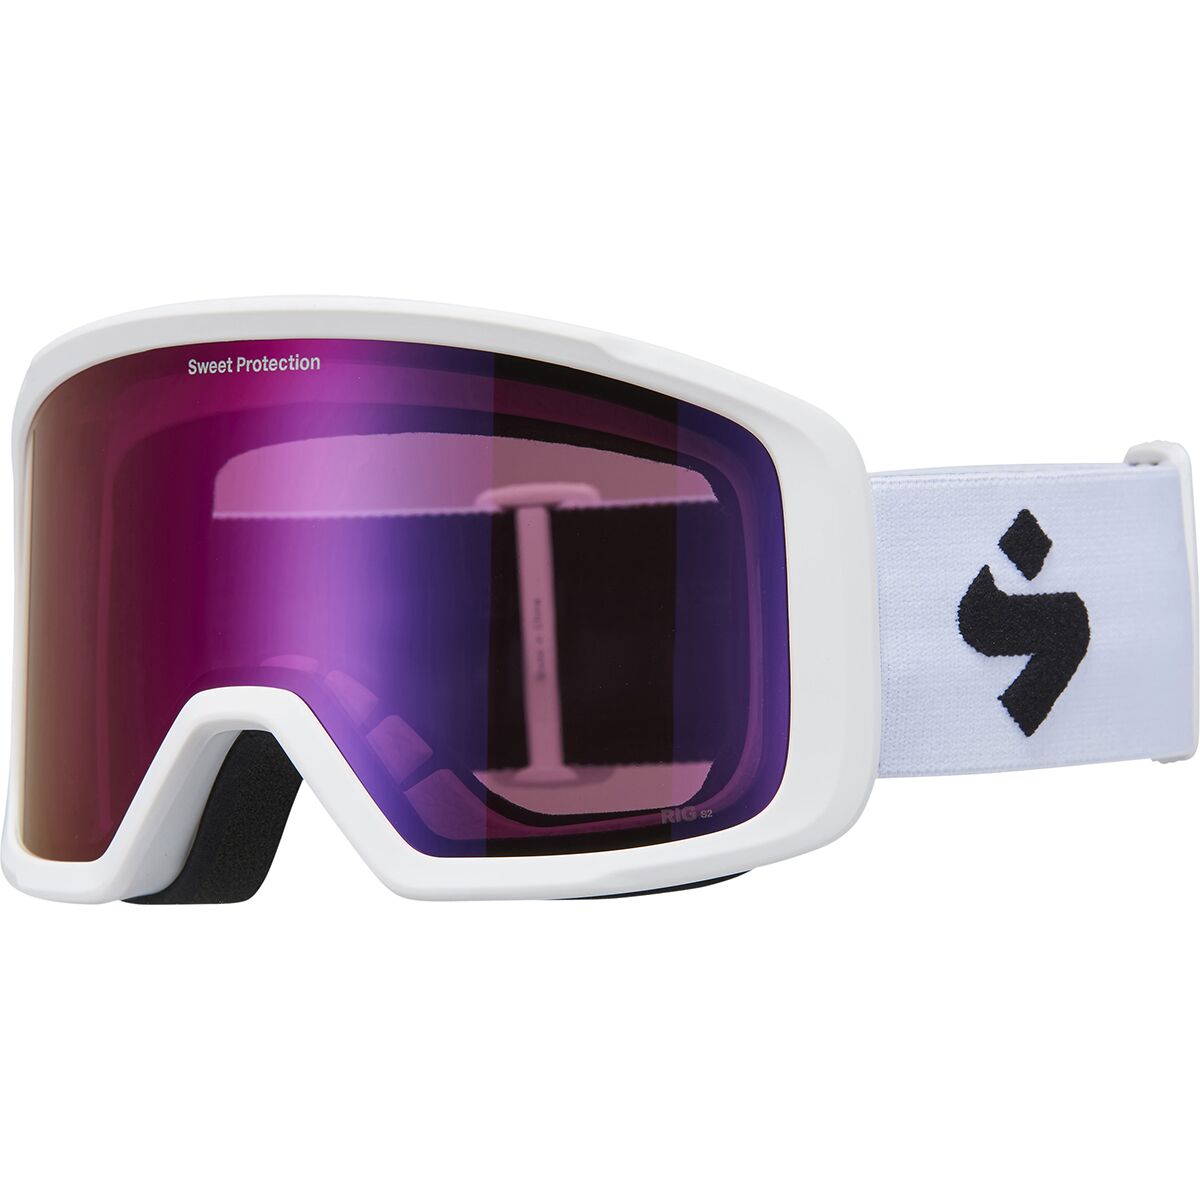 Sweet Protection Firewall RIG Reflect Low Bridge Goggle